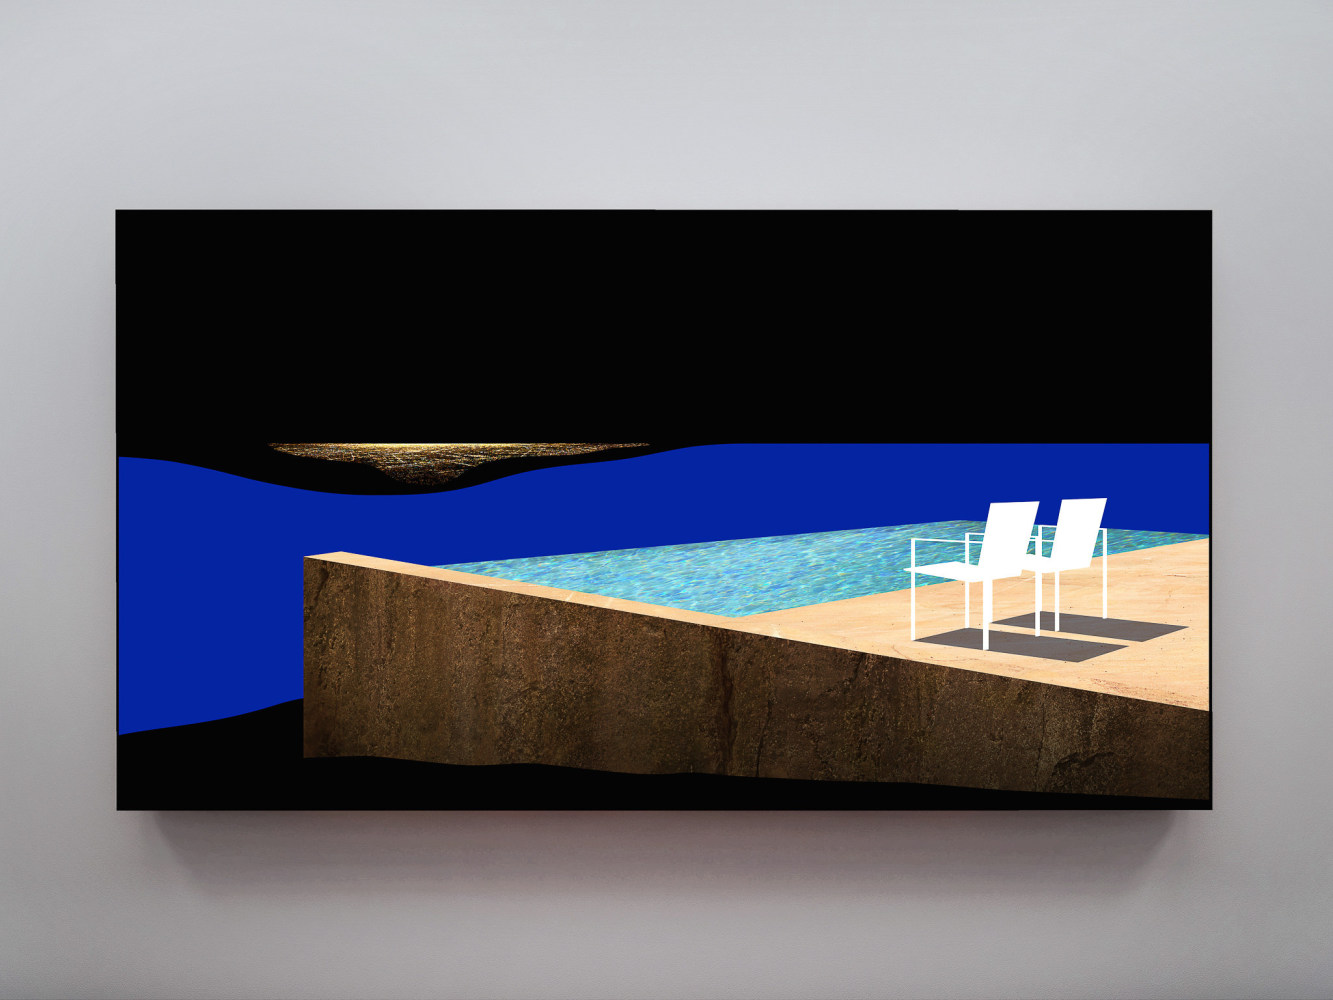 Doug Aitken

Shock and Awe (two chairs and pool)&amp;nbsp;

2019

Chromogenic transparency on acrylic in aluminum lightbox with LEDs

67 3/4 x 124 1/2 x 7 1/8 inches (172.1 x 316.2 x 18.1 cm)

Edition of 4, with 2 AP

DA 660

&amp;nbsp;

INQUIRE